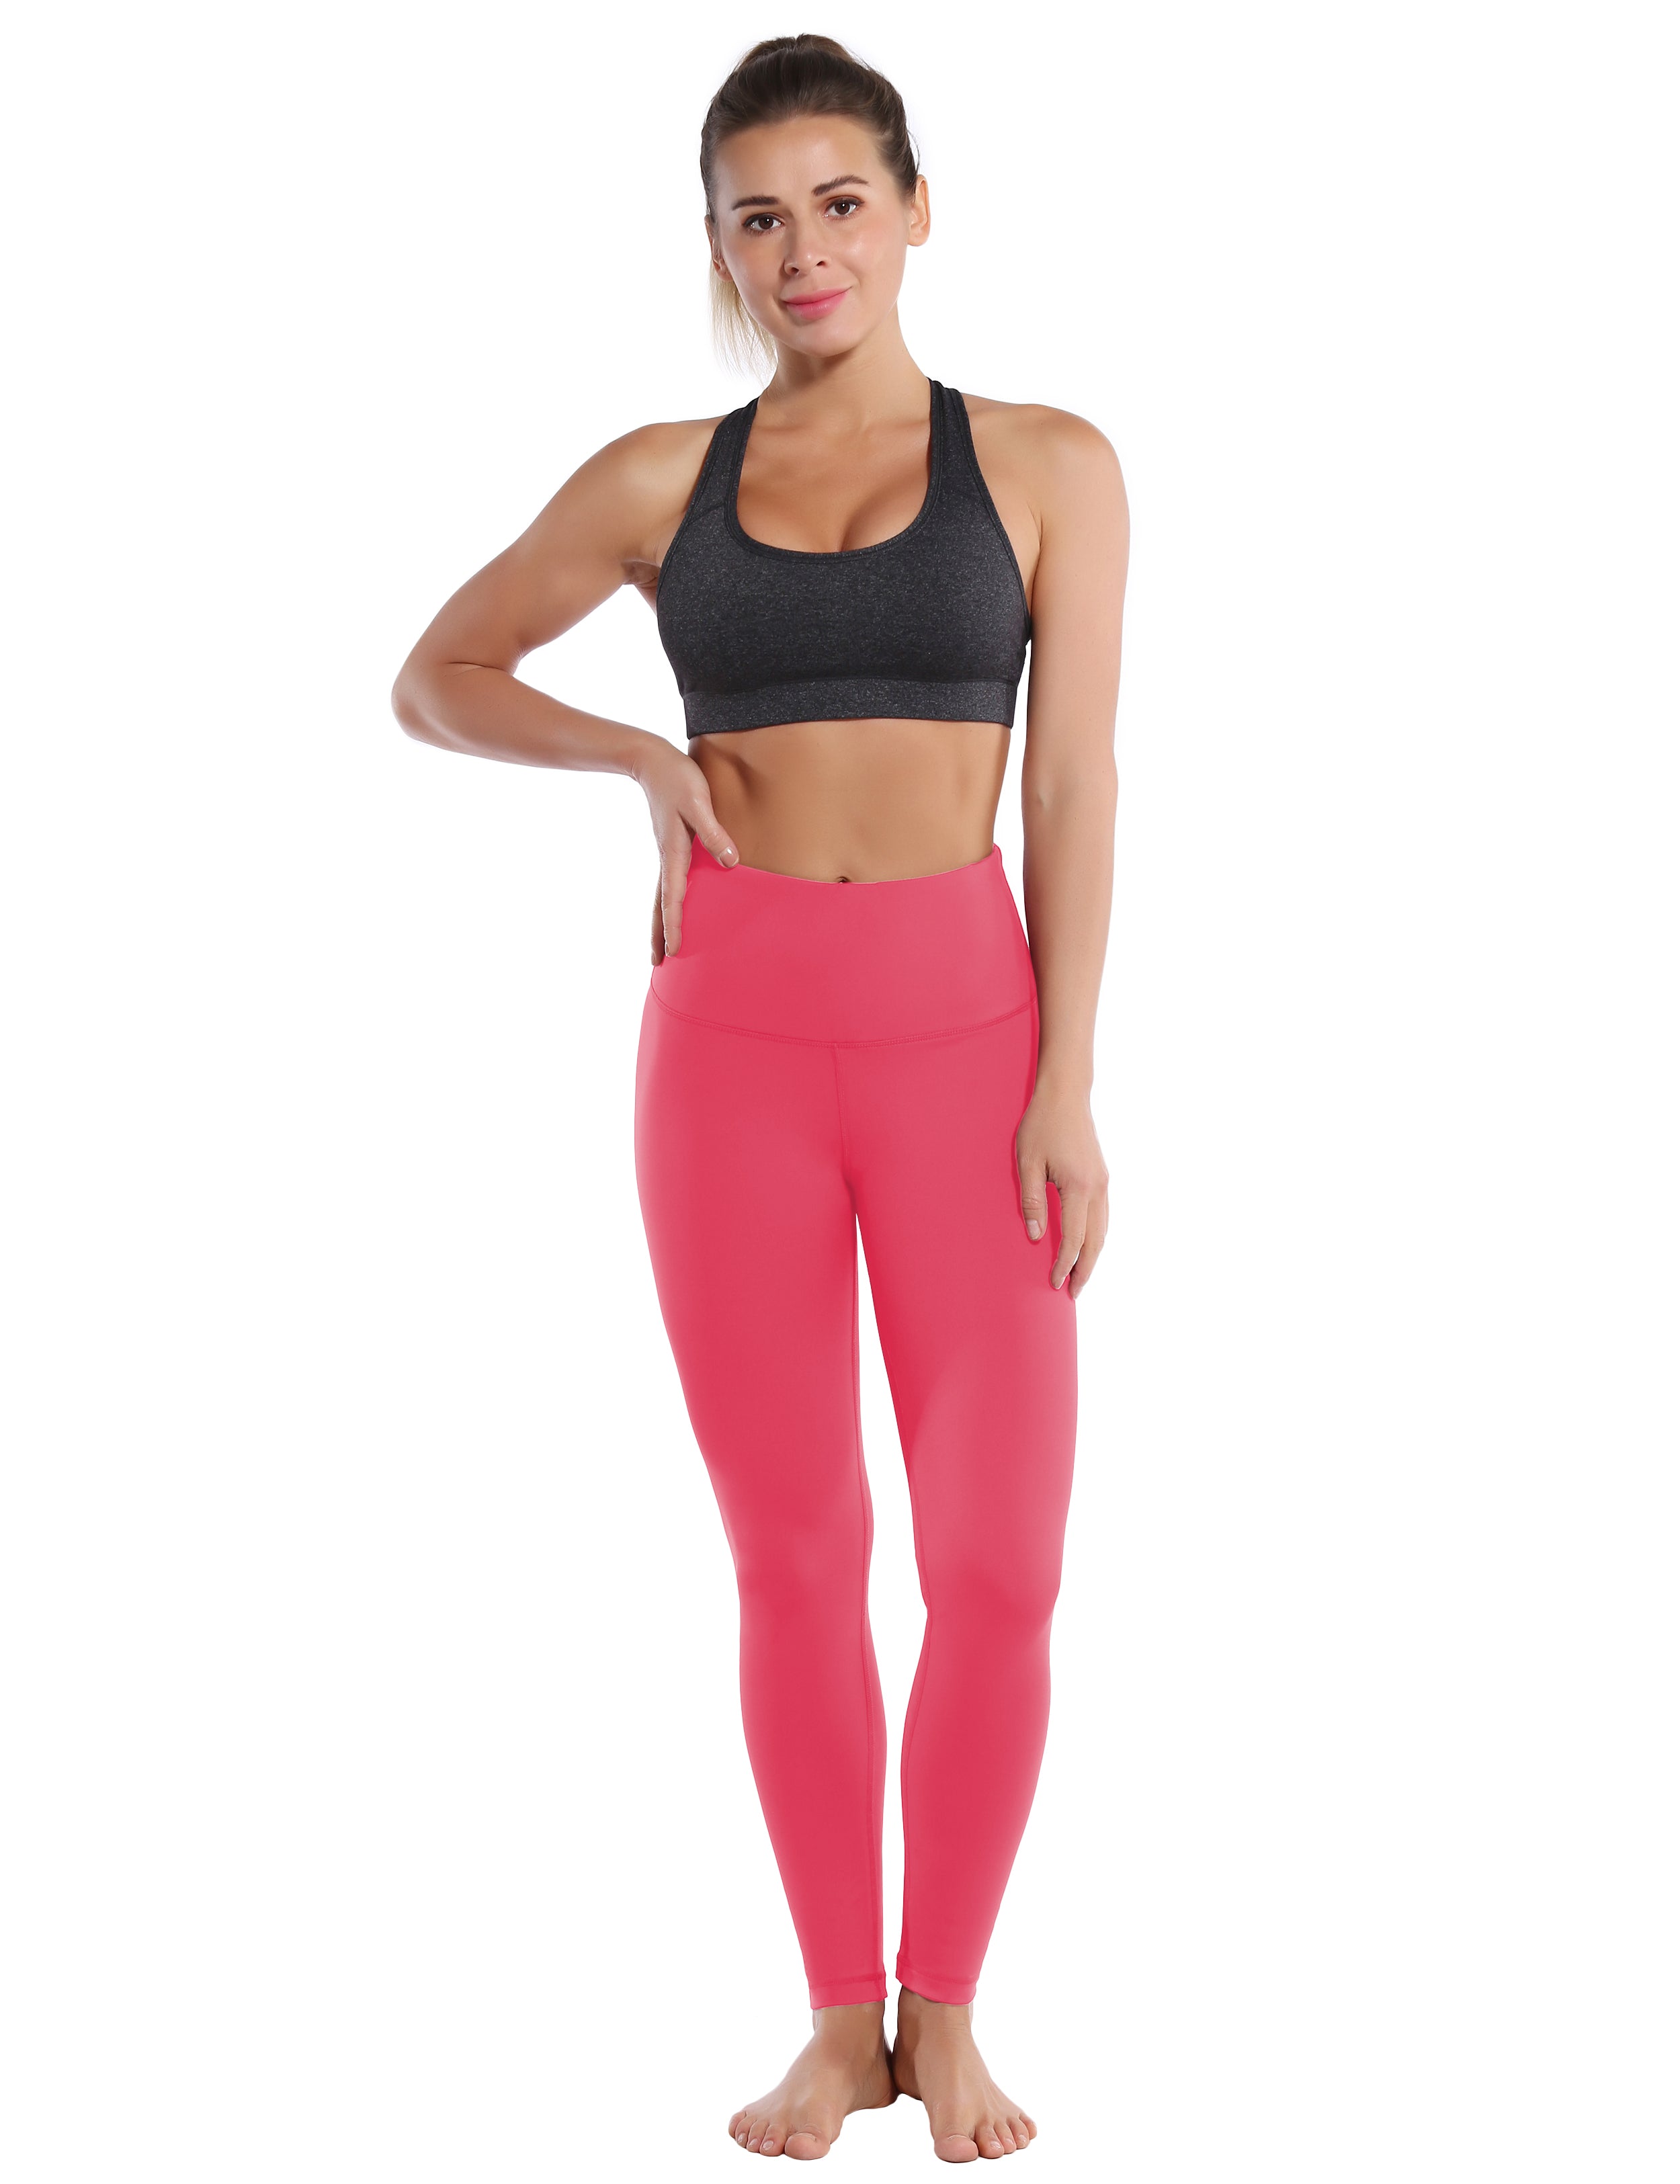 High Waist Yoga Pants rosecoral 75%Nylon/25%Spandex Fabric doesn't attract lint easily 4-way stretch No see-through Moisture-wicking Tummy control Inner pocket Four lengths